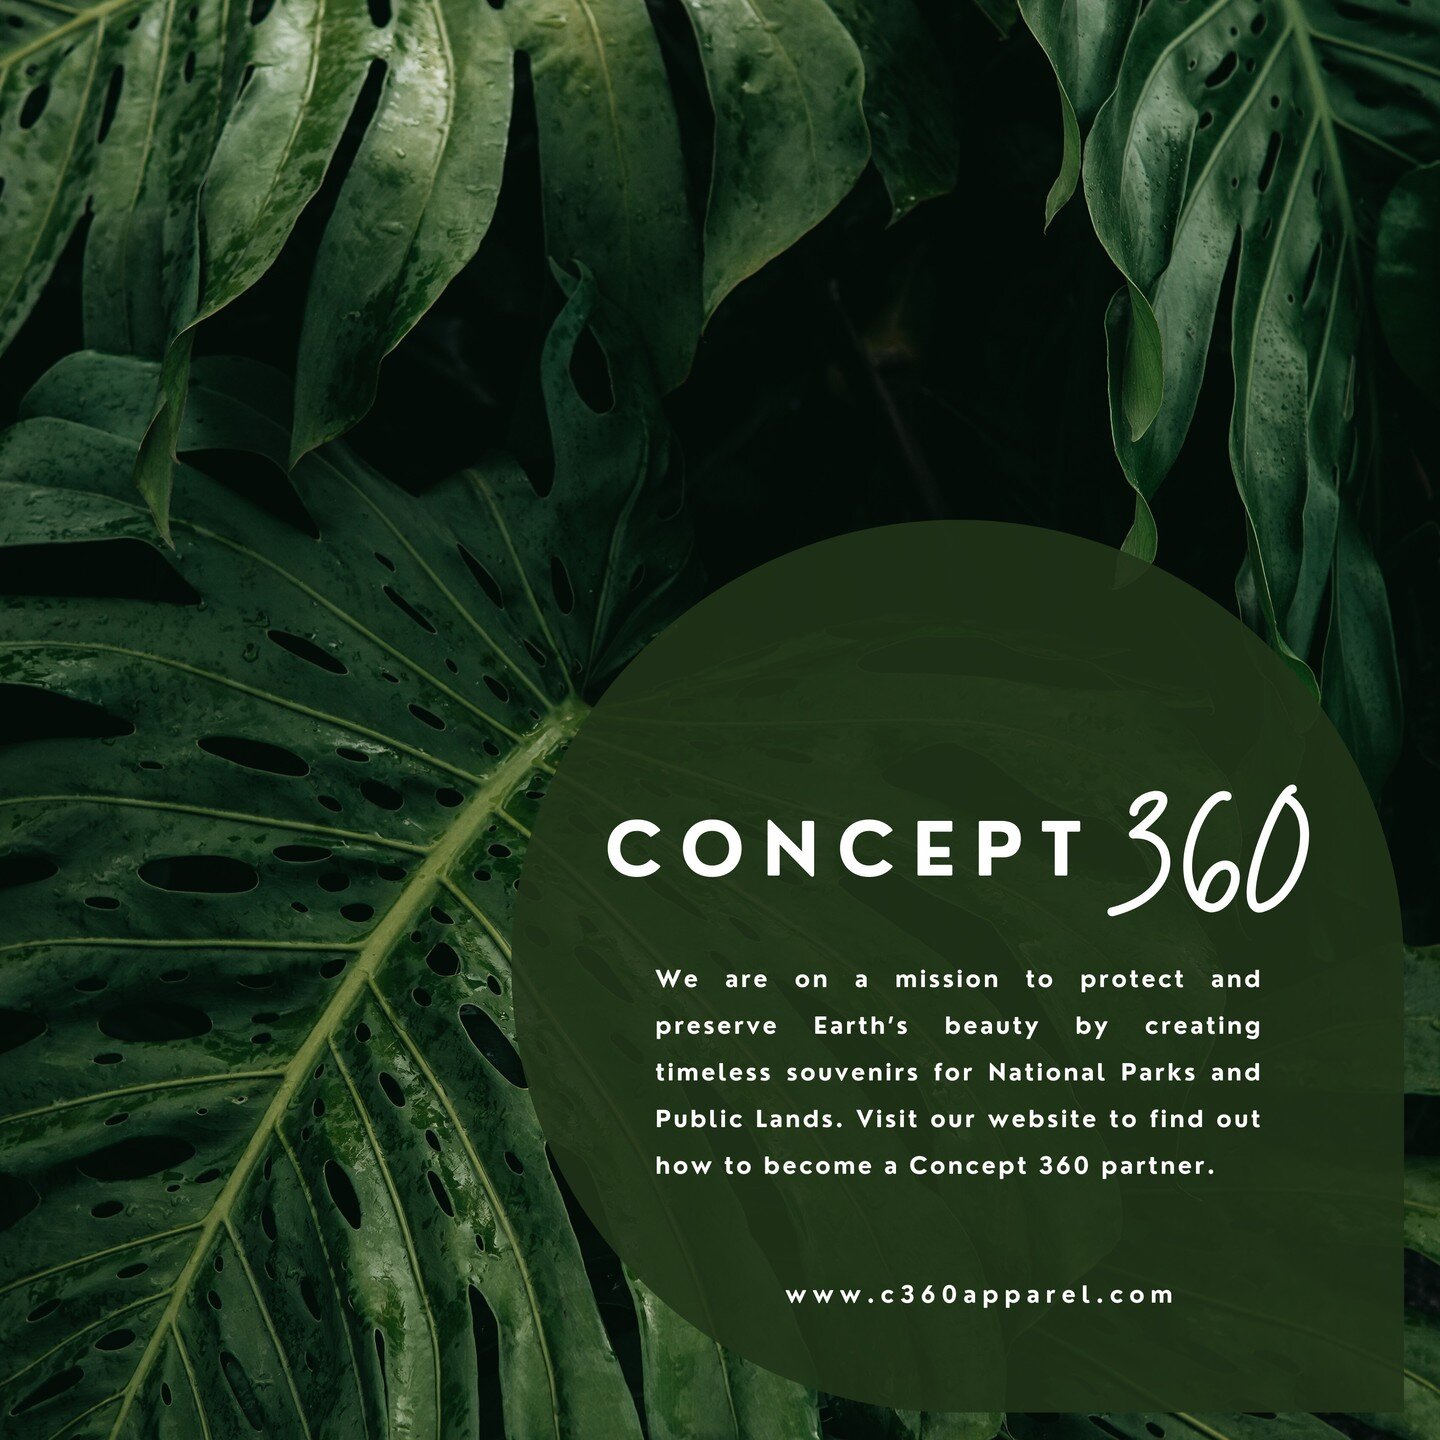 Here at Concept 360, we pull inspiration from some of the most beautiful destinations in America to create timeless souvenirs for National Parks and Public Lands. We strive to spread awareness of the importance of conserving these national landmarks 